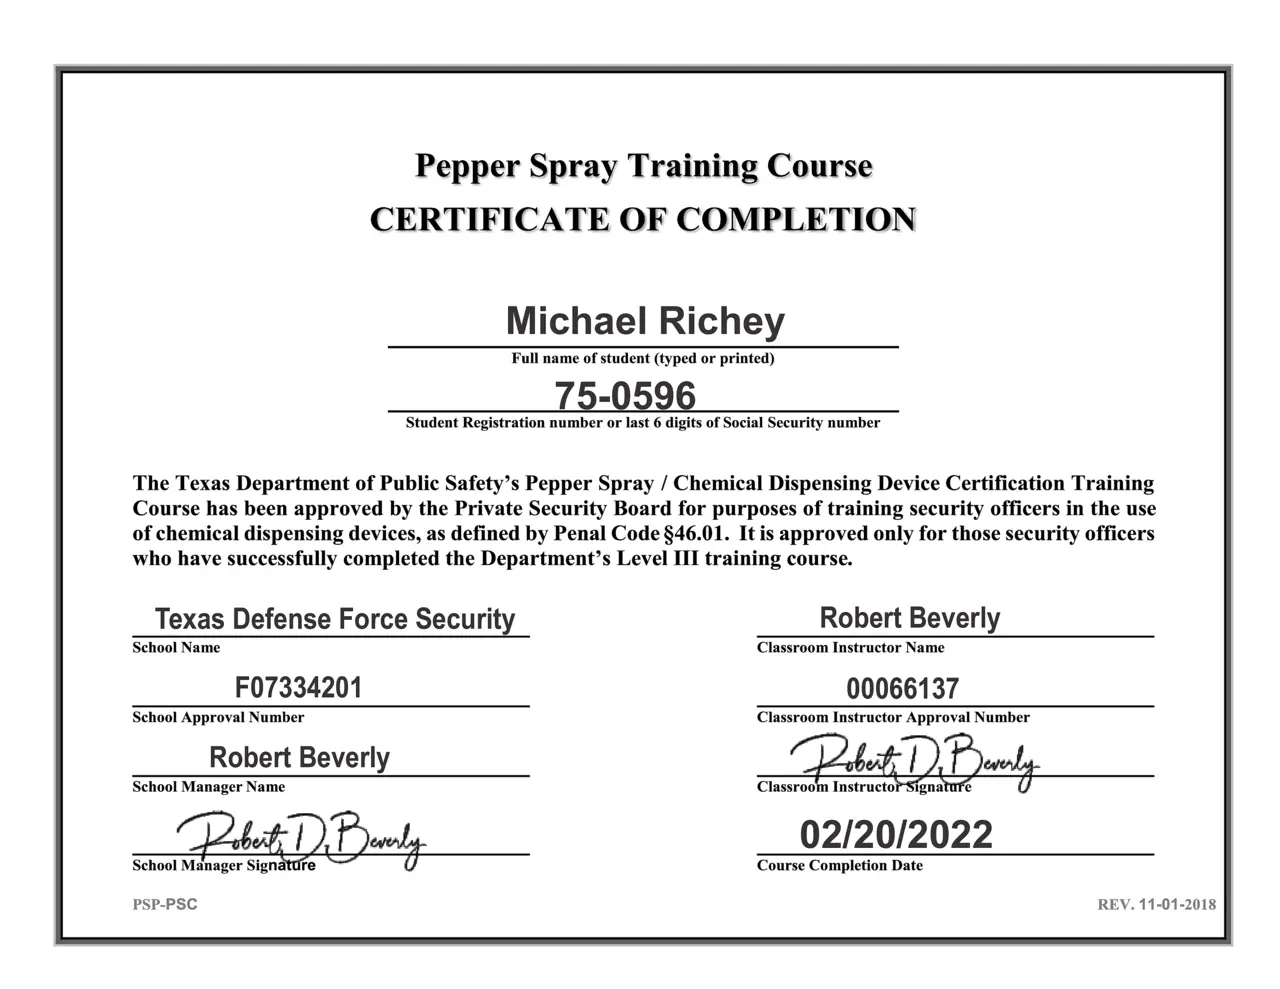 Certificates for Michael Richey